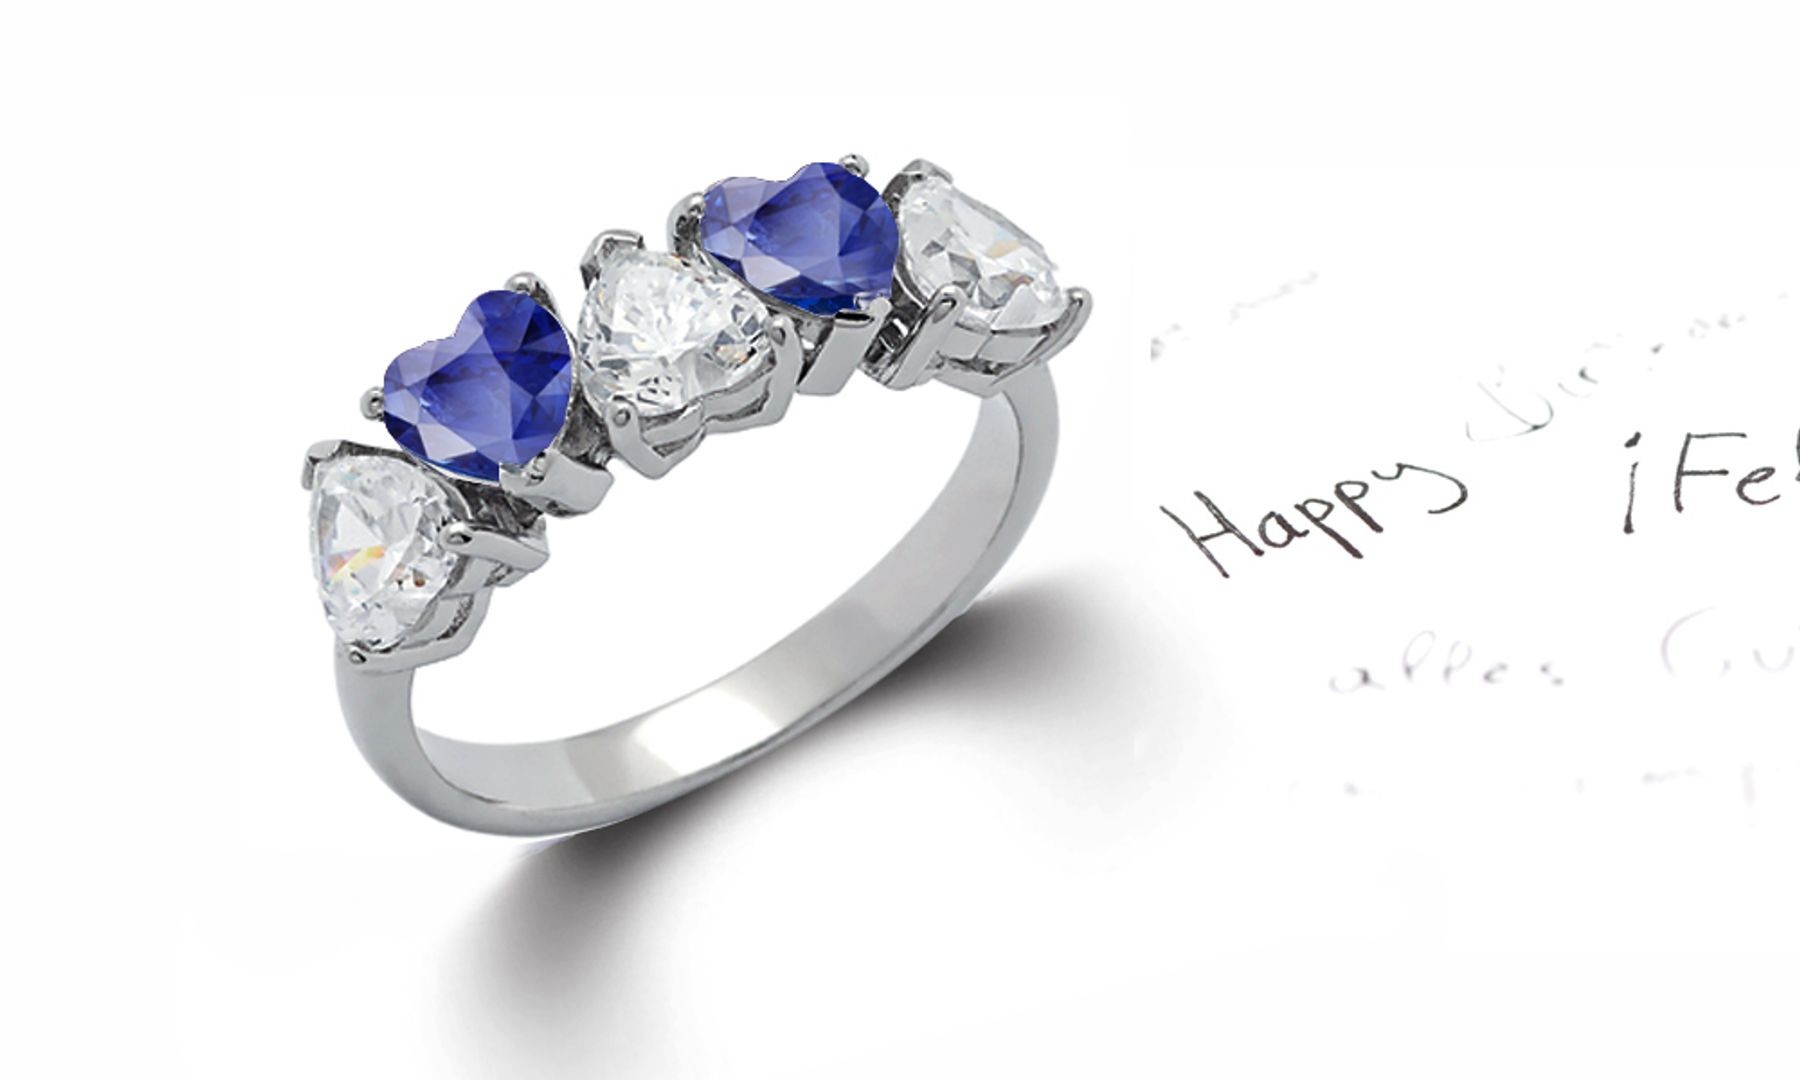 Made to Order 5 Stone Heart Shaped Diamonds & Blue Sapphires Anniversary Rings